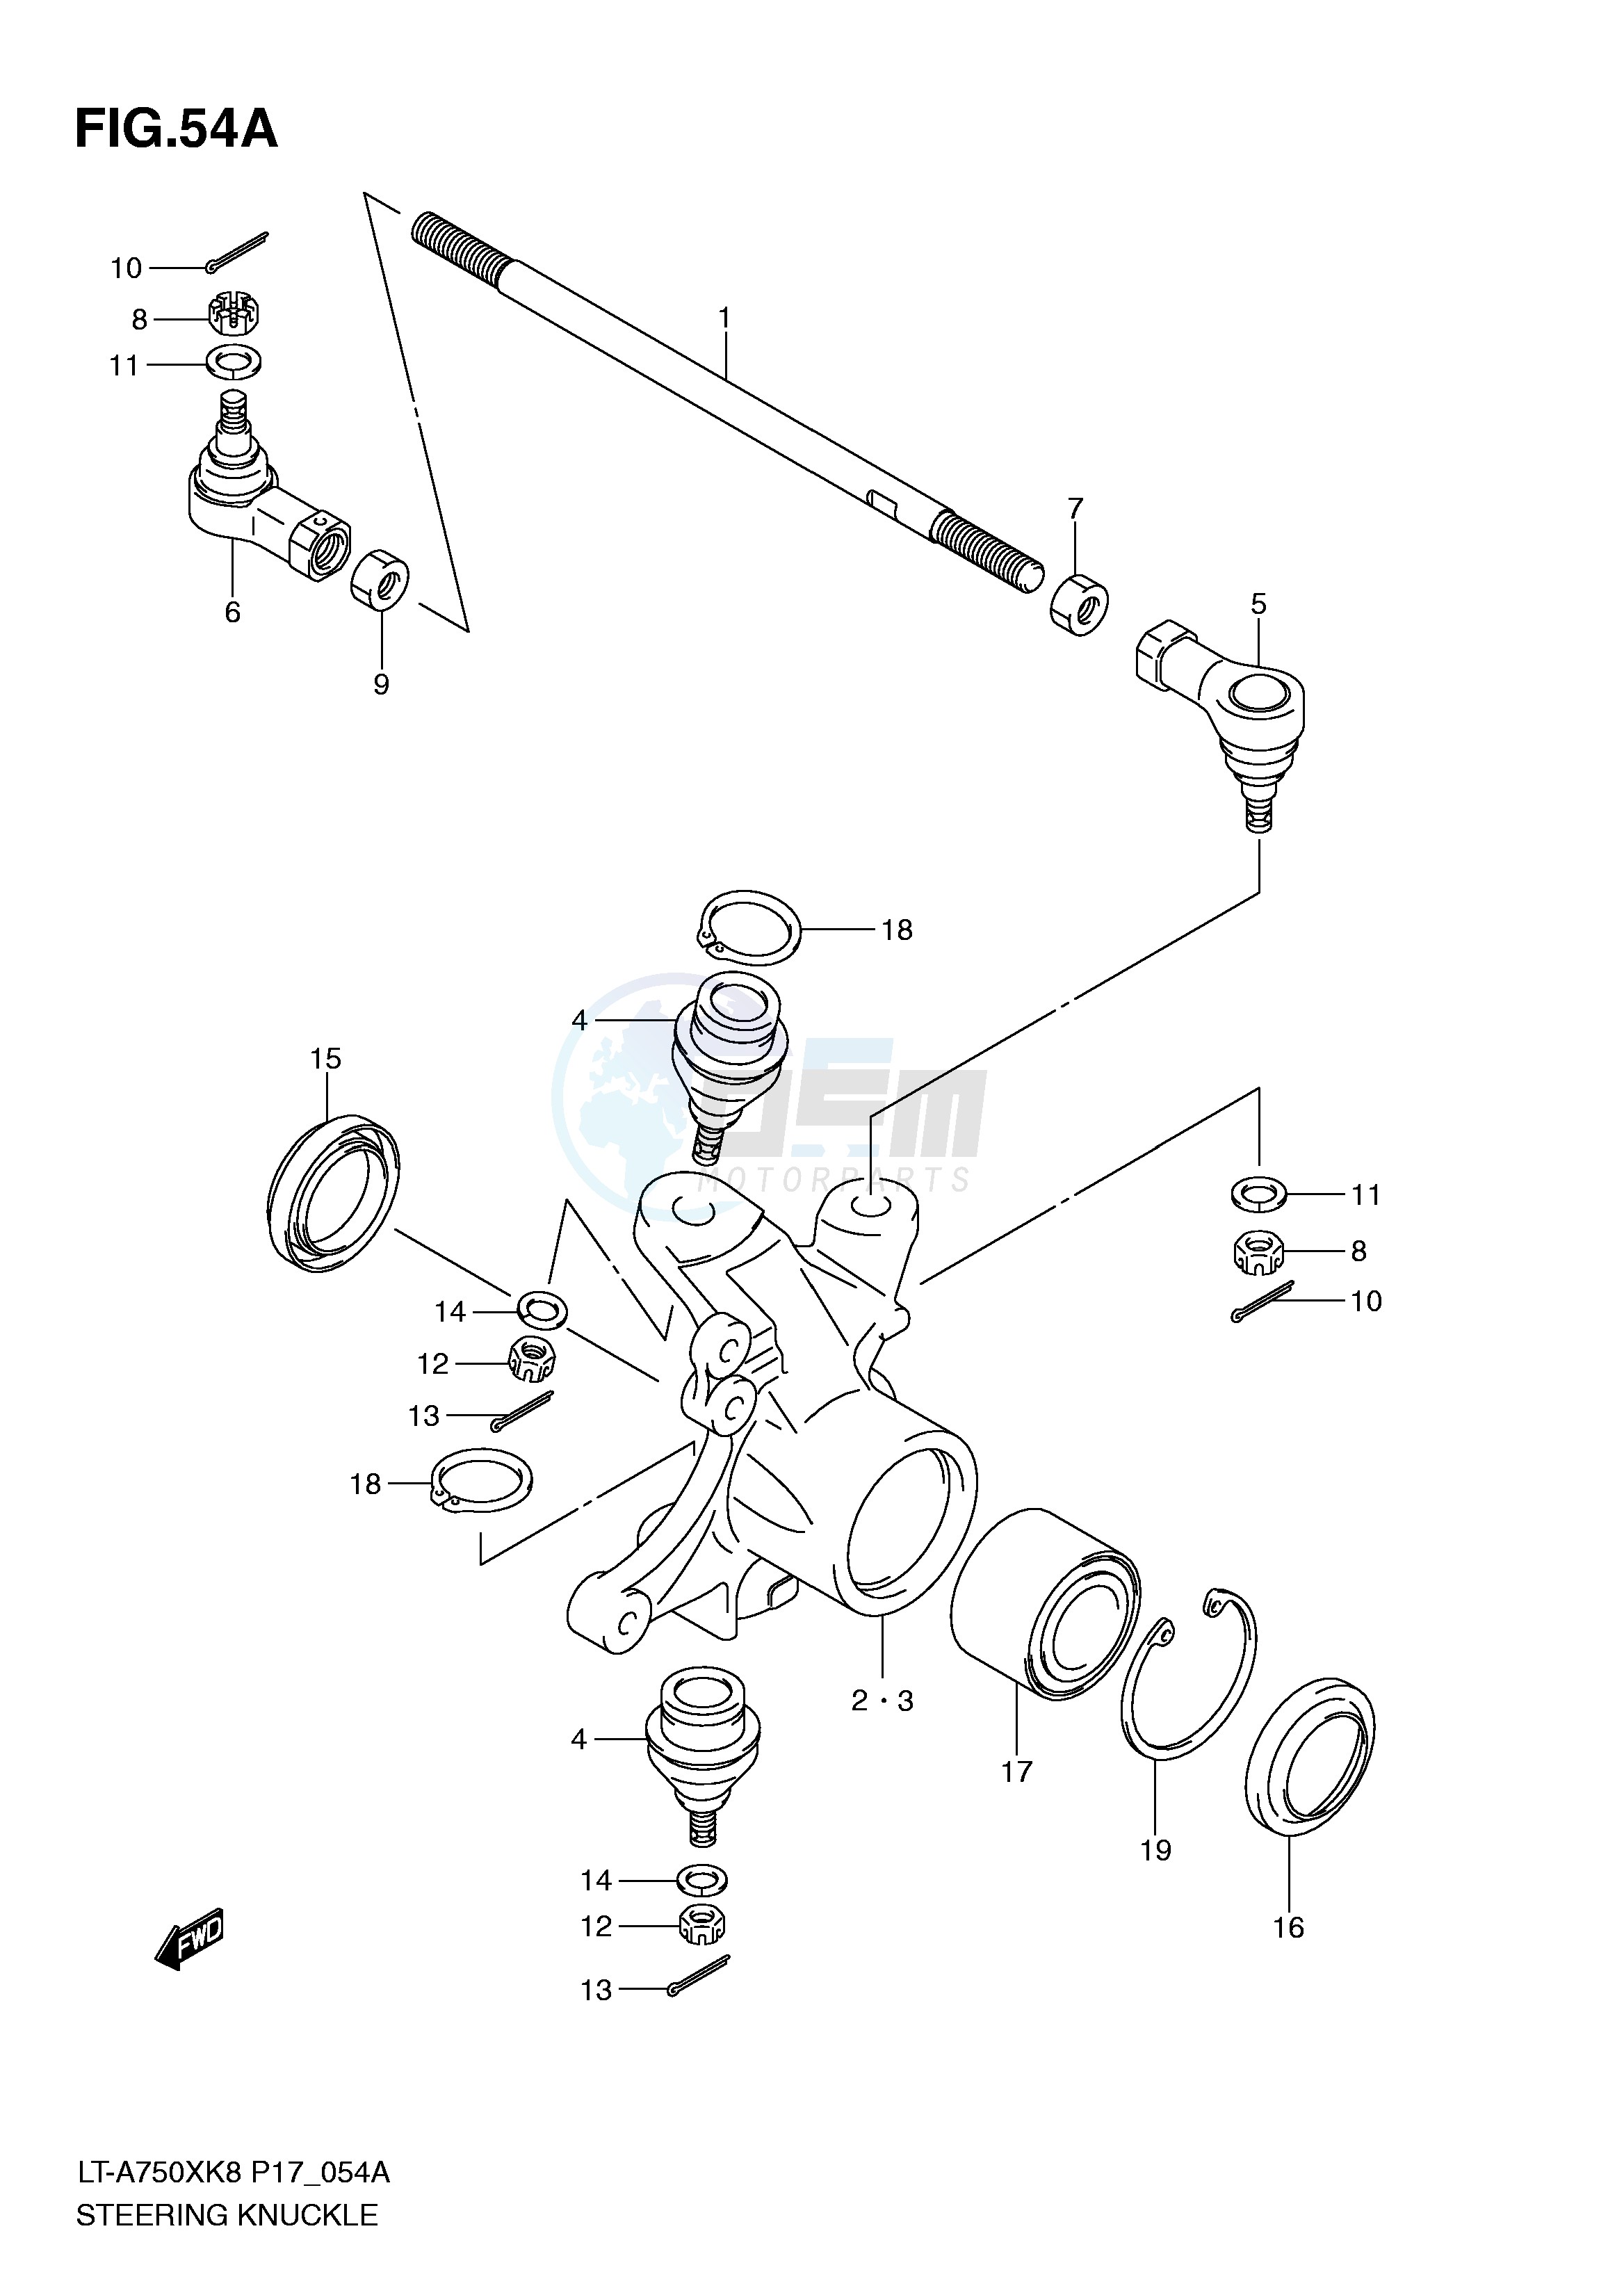 STEERING KNUCKLE (LT-A750XL0) image